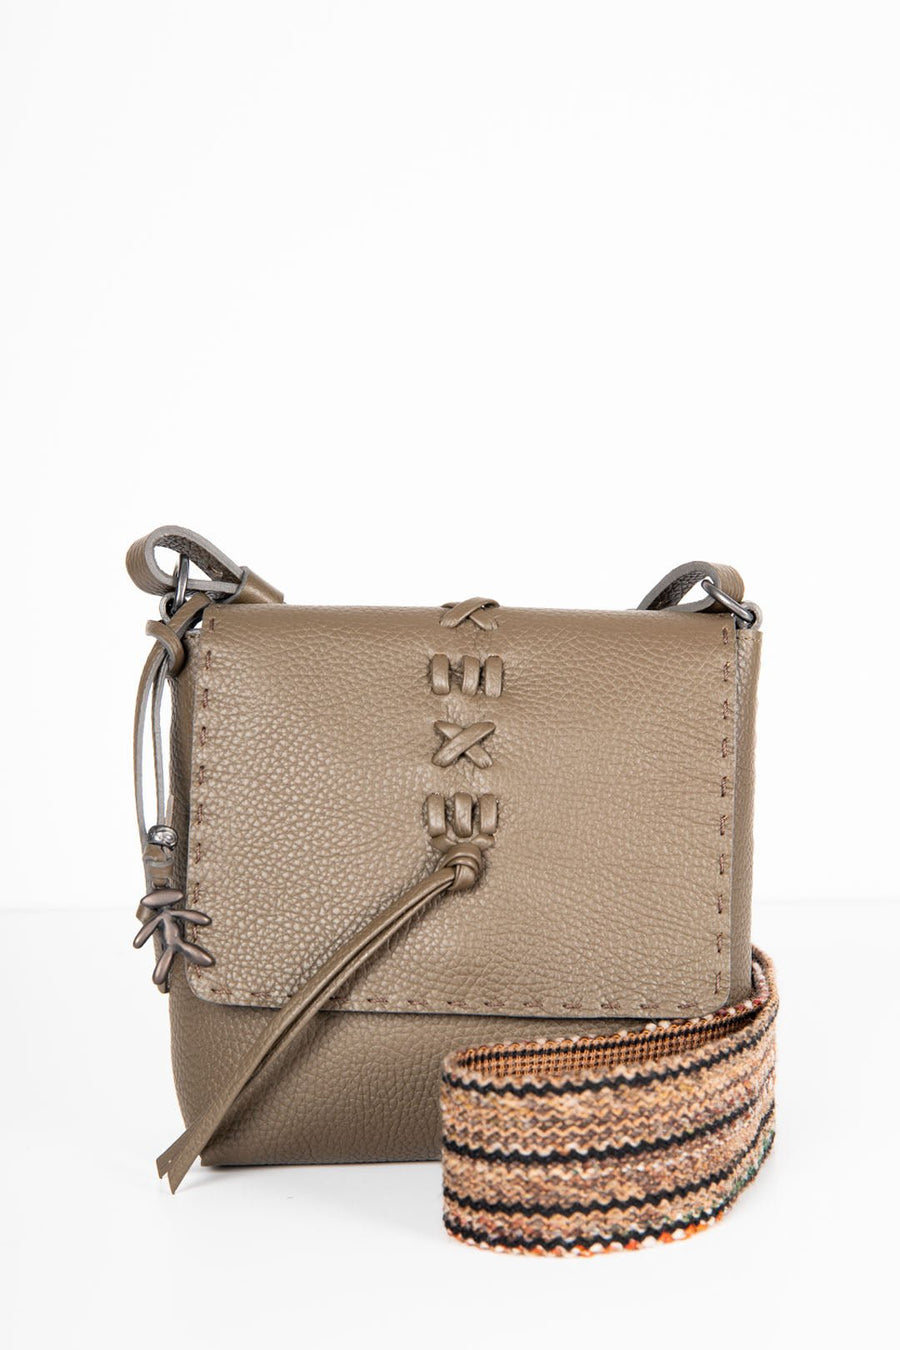 HENRY BEGUELIN SMALL CROSSBODY, OLIVE GREEN - Burning Torch Online Boutique